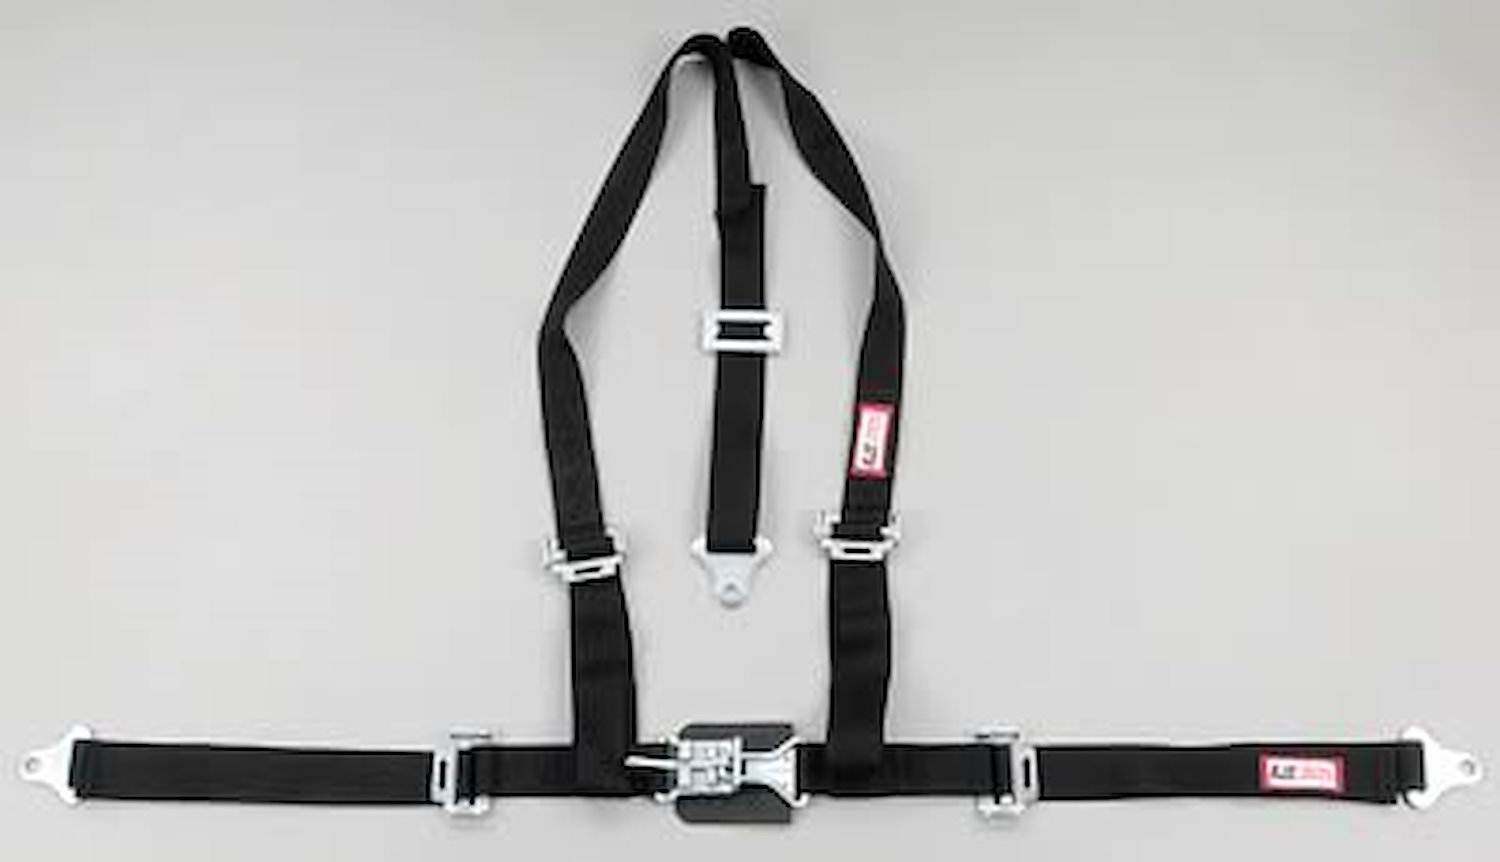 NON-SFI L&L HARNESS 2 PULL UP Lap Belt SEWN IN 2 S.H. V ROLL BAR Mount ALL WRAP ENDS GRAY